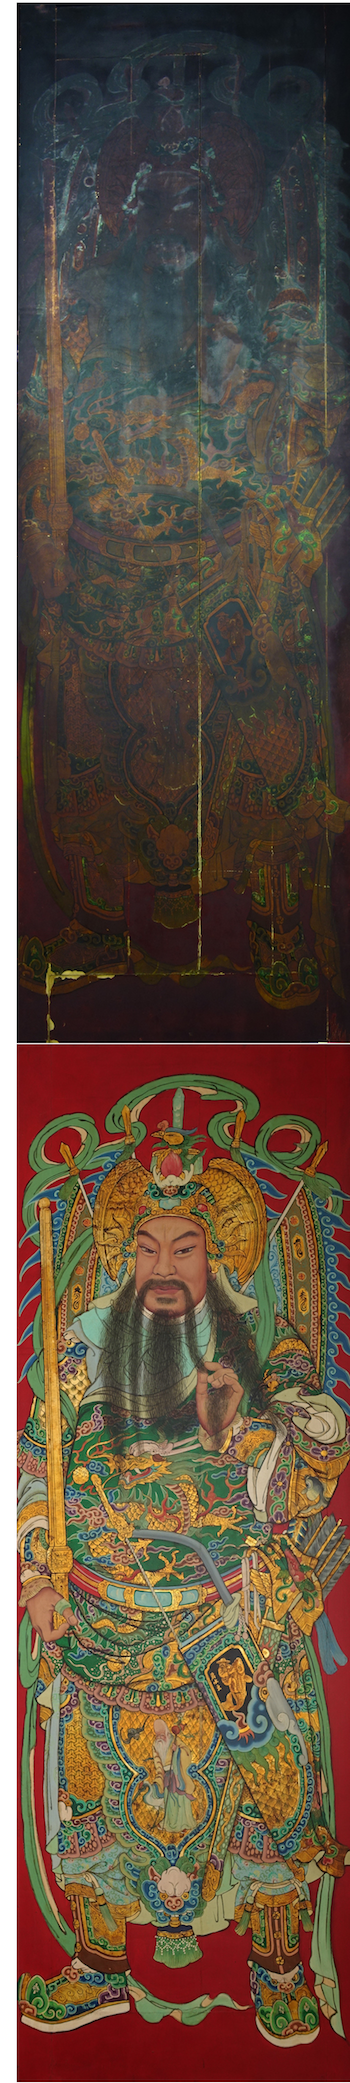 Leo Tsai art restoration before and after